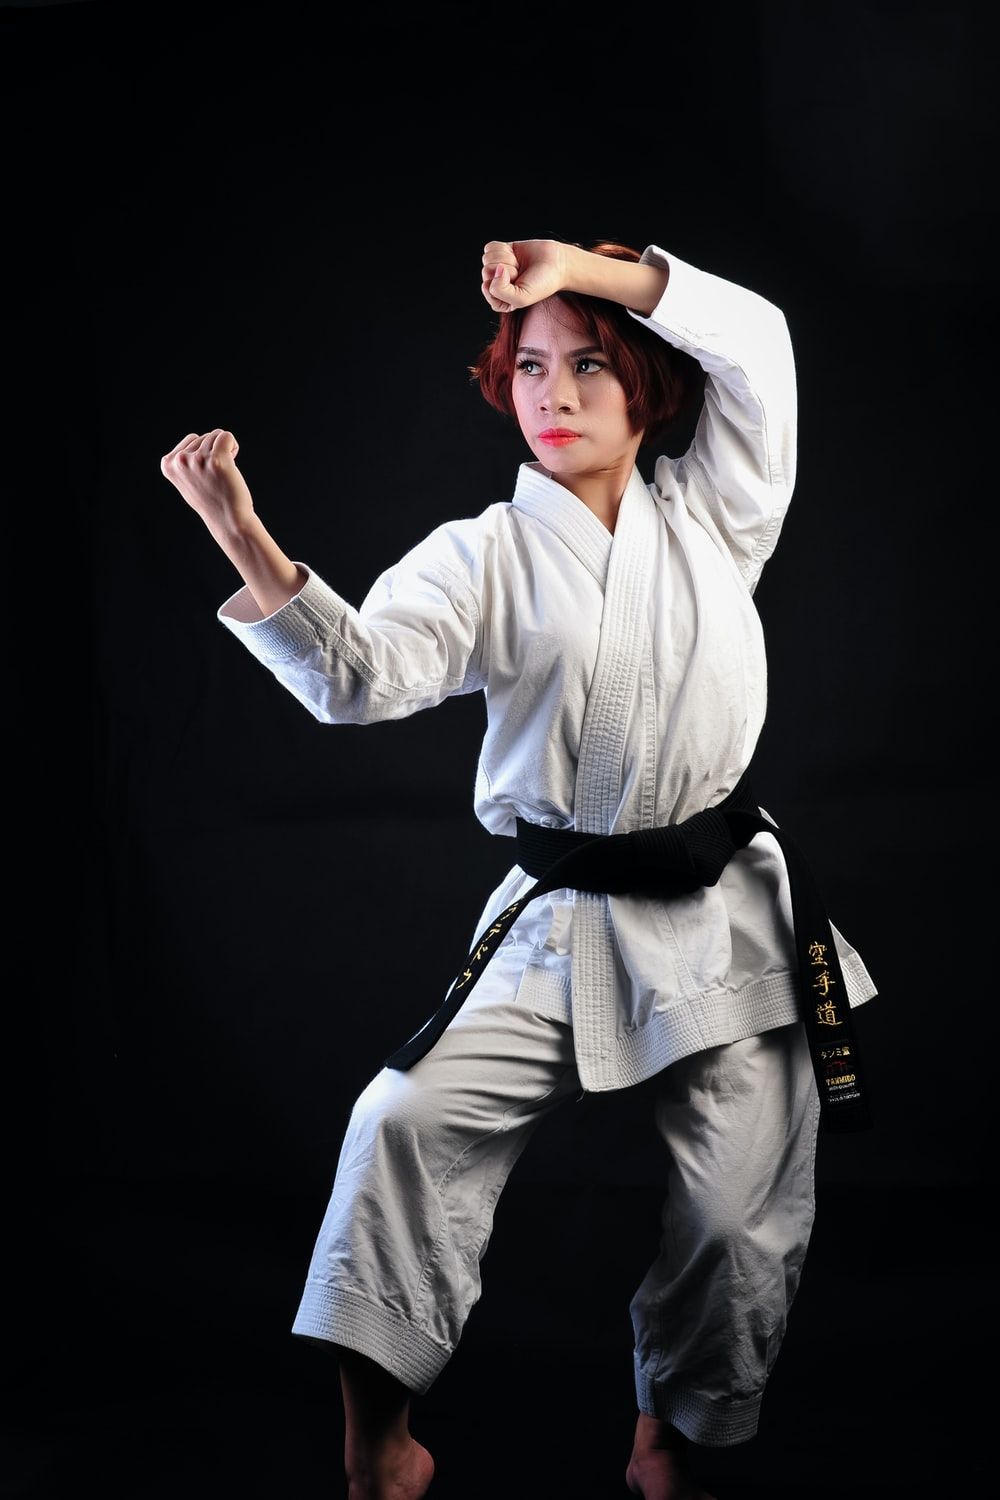 Karate Picture. Download Free Image